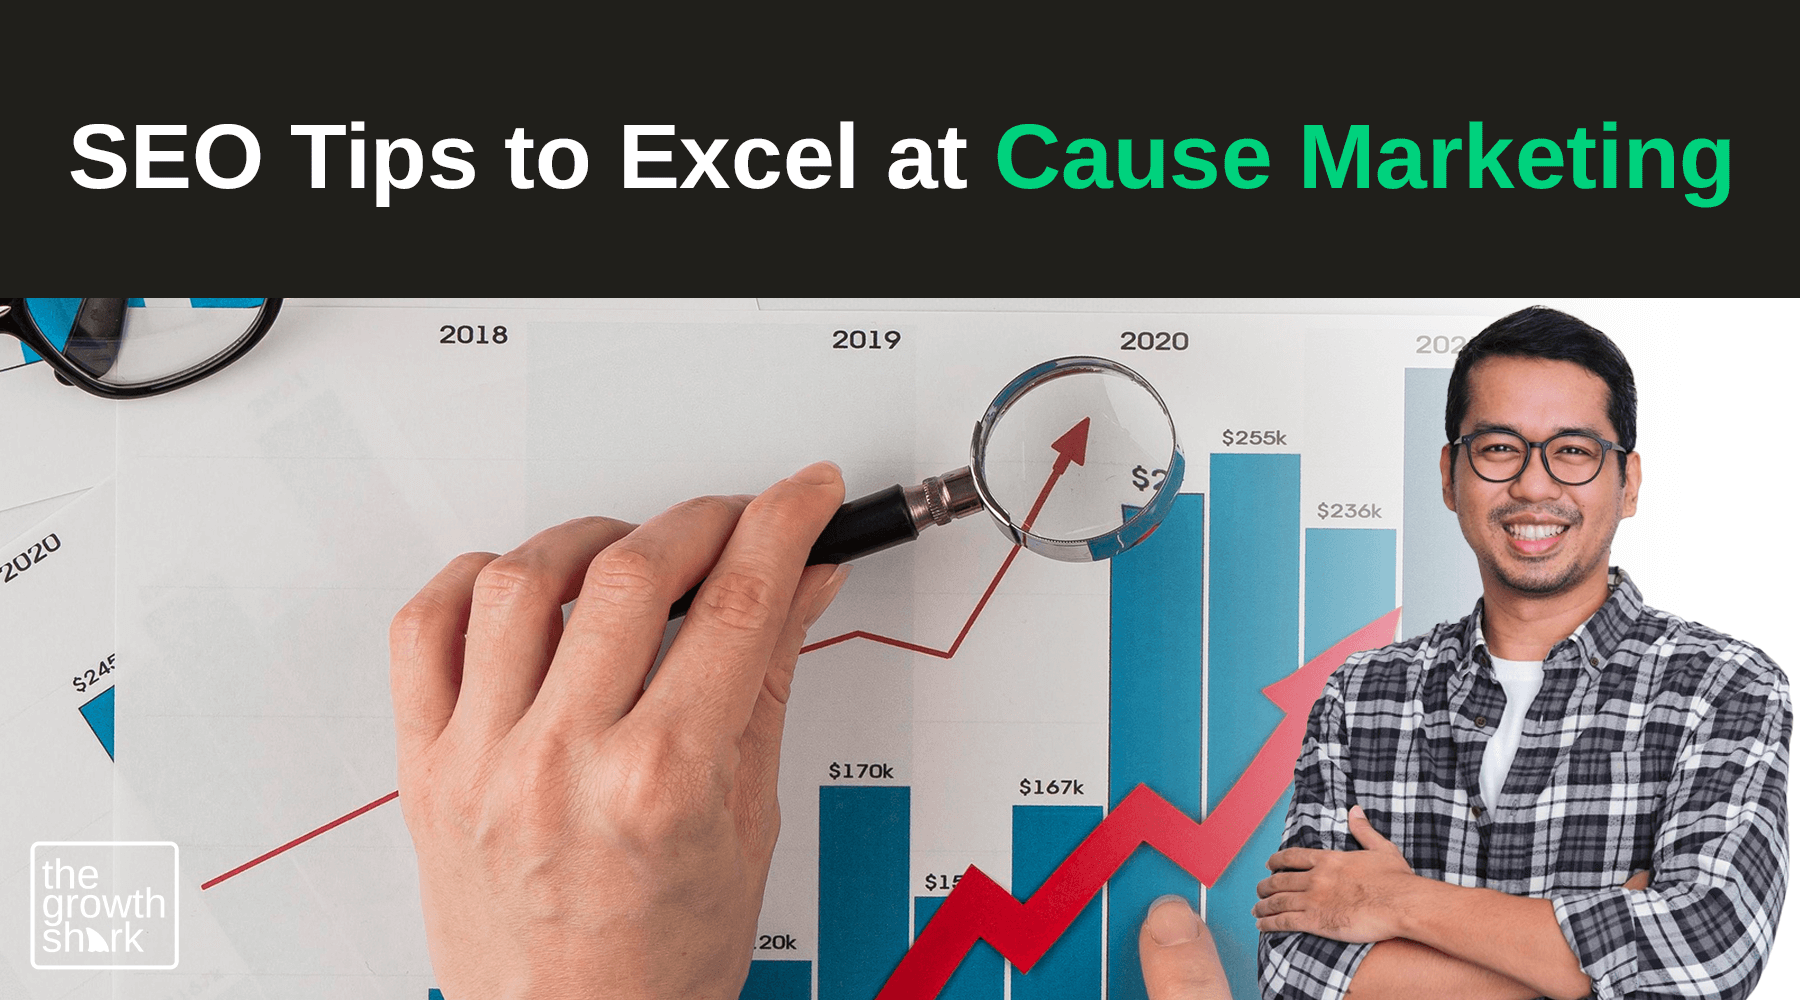 Cause Marketing SEO: SEO Tips to Excel at Cause Marketing